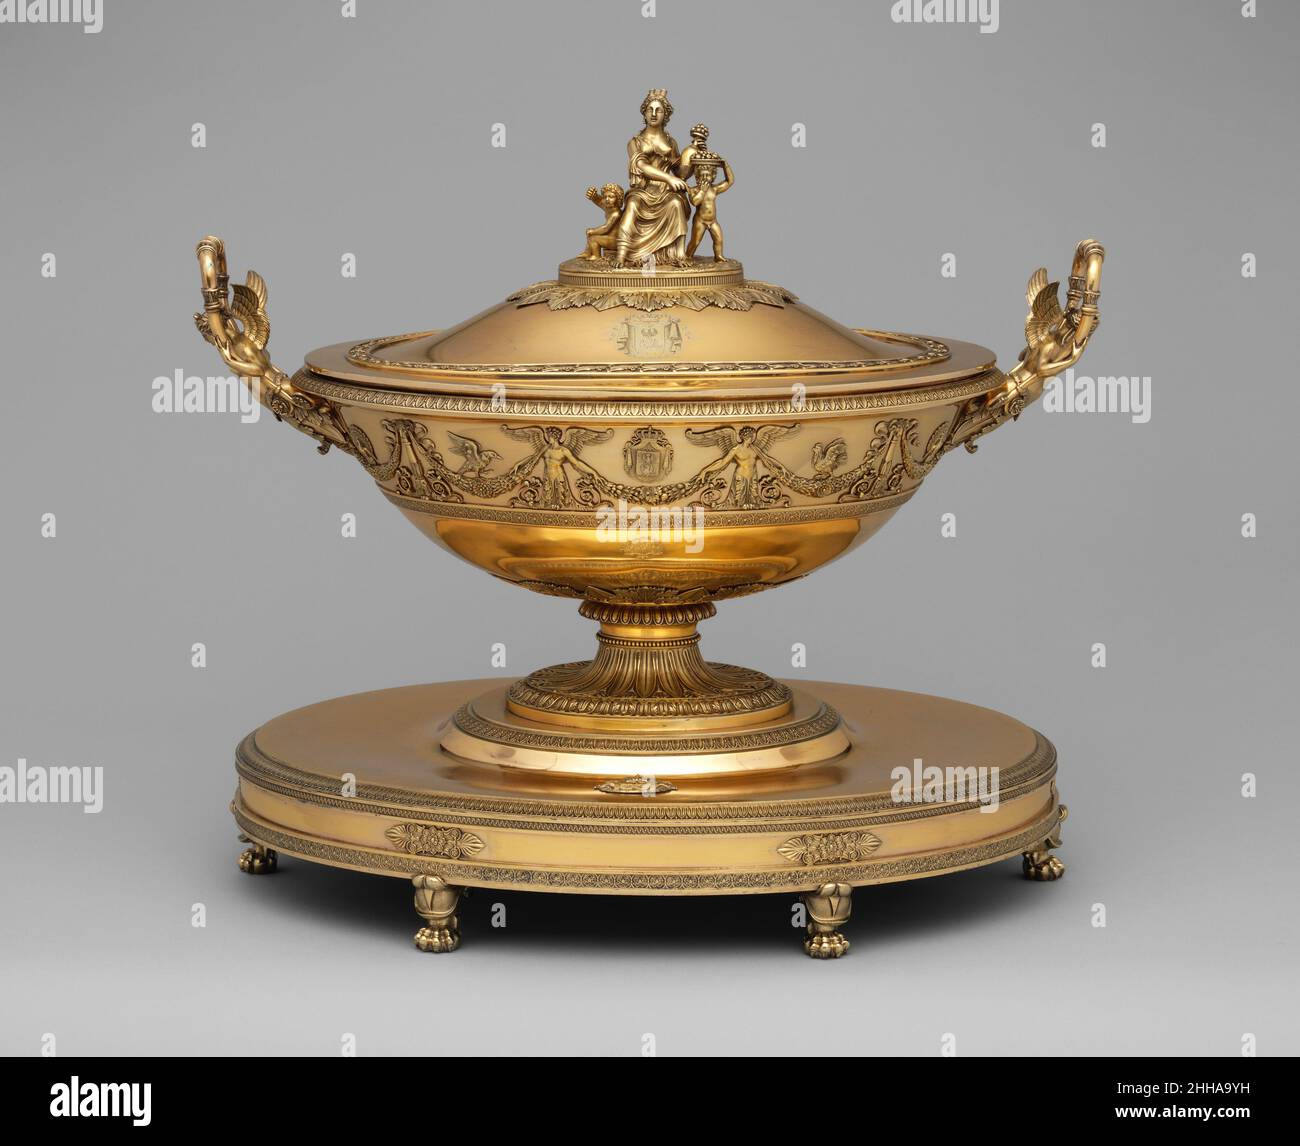 Tureen 1794–1814 Charles Percier French This tureen is part of a large table service reputedly given by Napoleon I to his sister Pauline and her husband, Prince Camillo Borghese.. Tureen. French, Paris. 1794–1814. Silver gilt. Metalwork-Silver Stock Photo